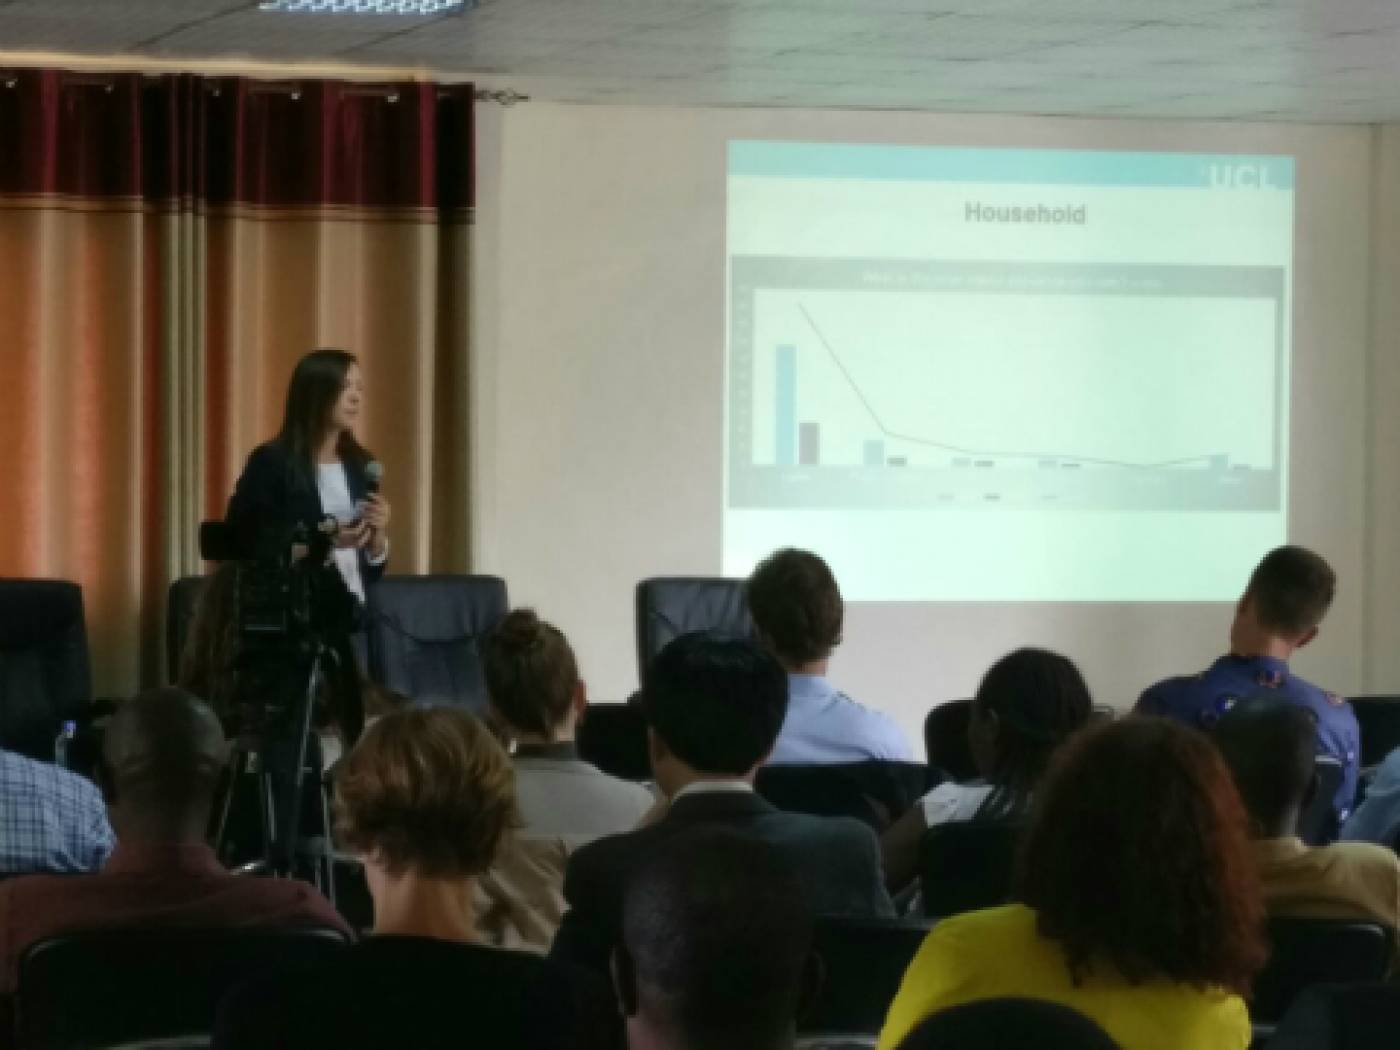 UCL USAR PhD student Iwona Bisaga presenting initial findings of her research focusing on SHS users in Rwanda.